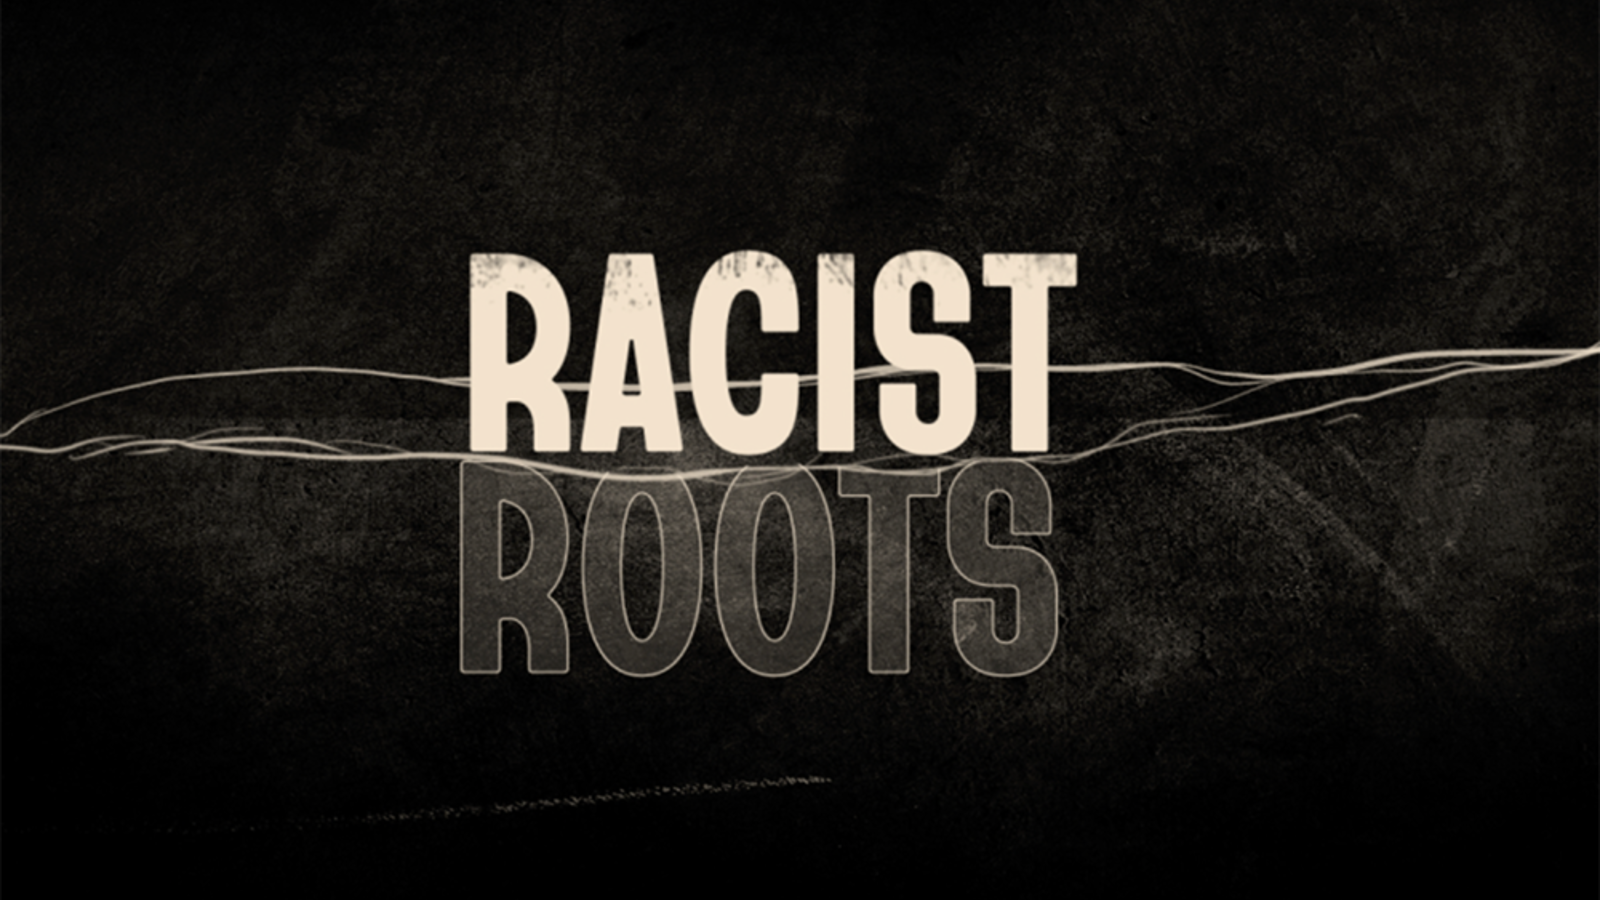 Racist Roots